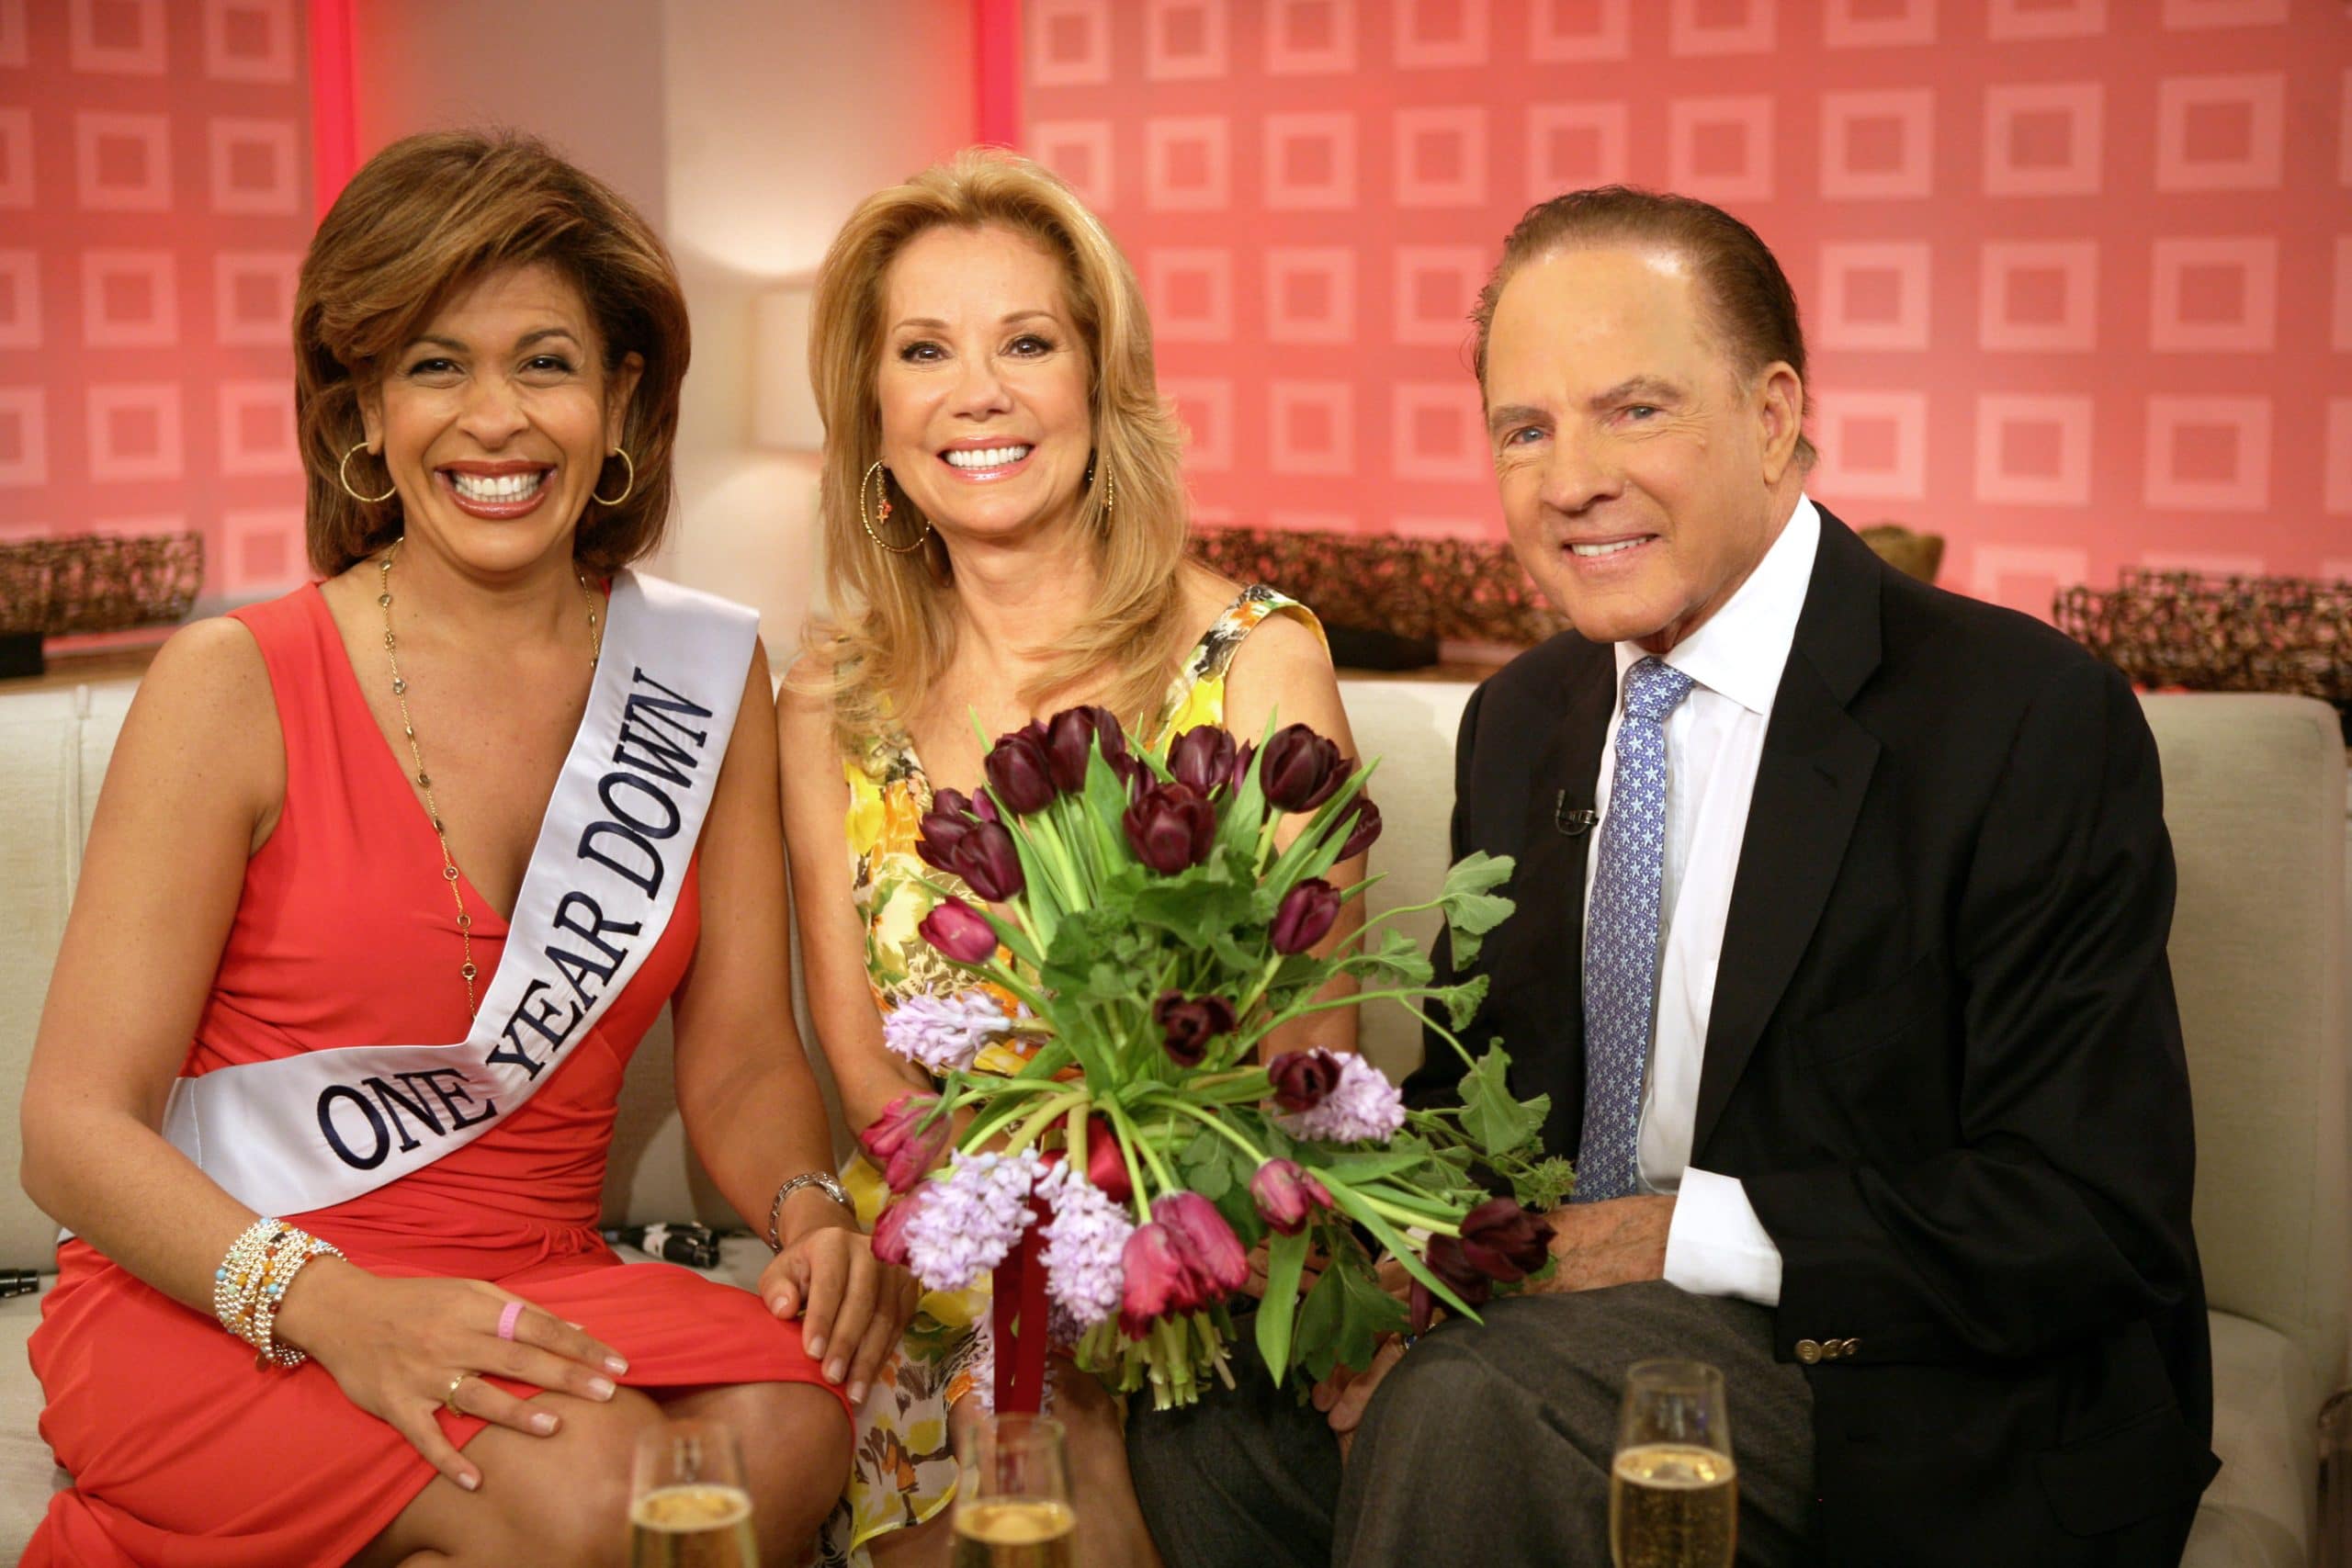 THE TODAY SHOW, (from left): Hoda Kotb, Kathie Lee Gifford, Frank Gifford